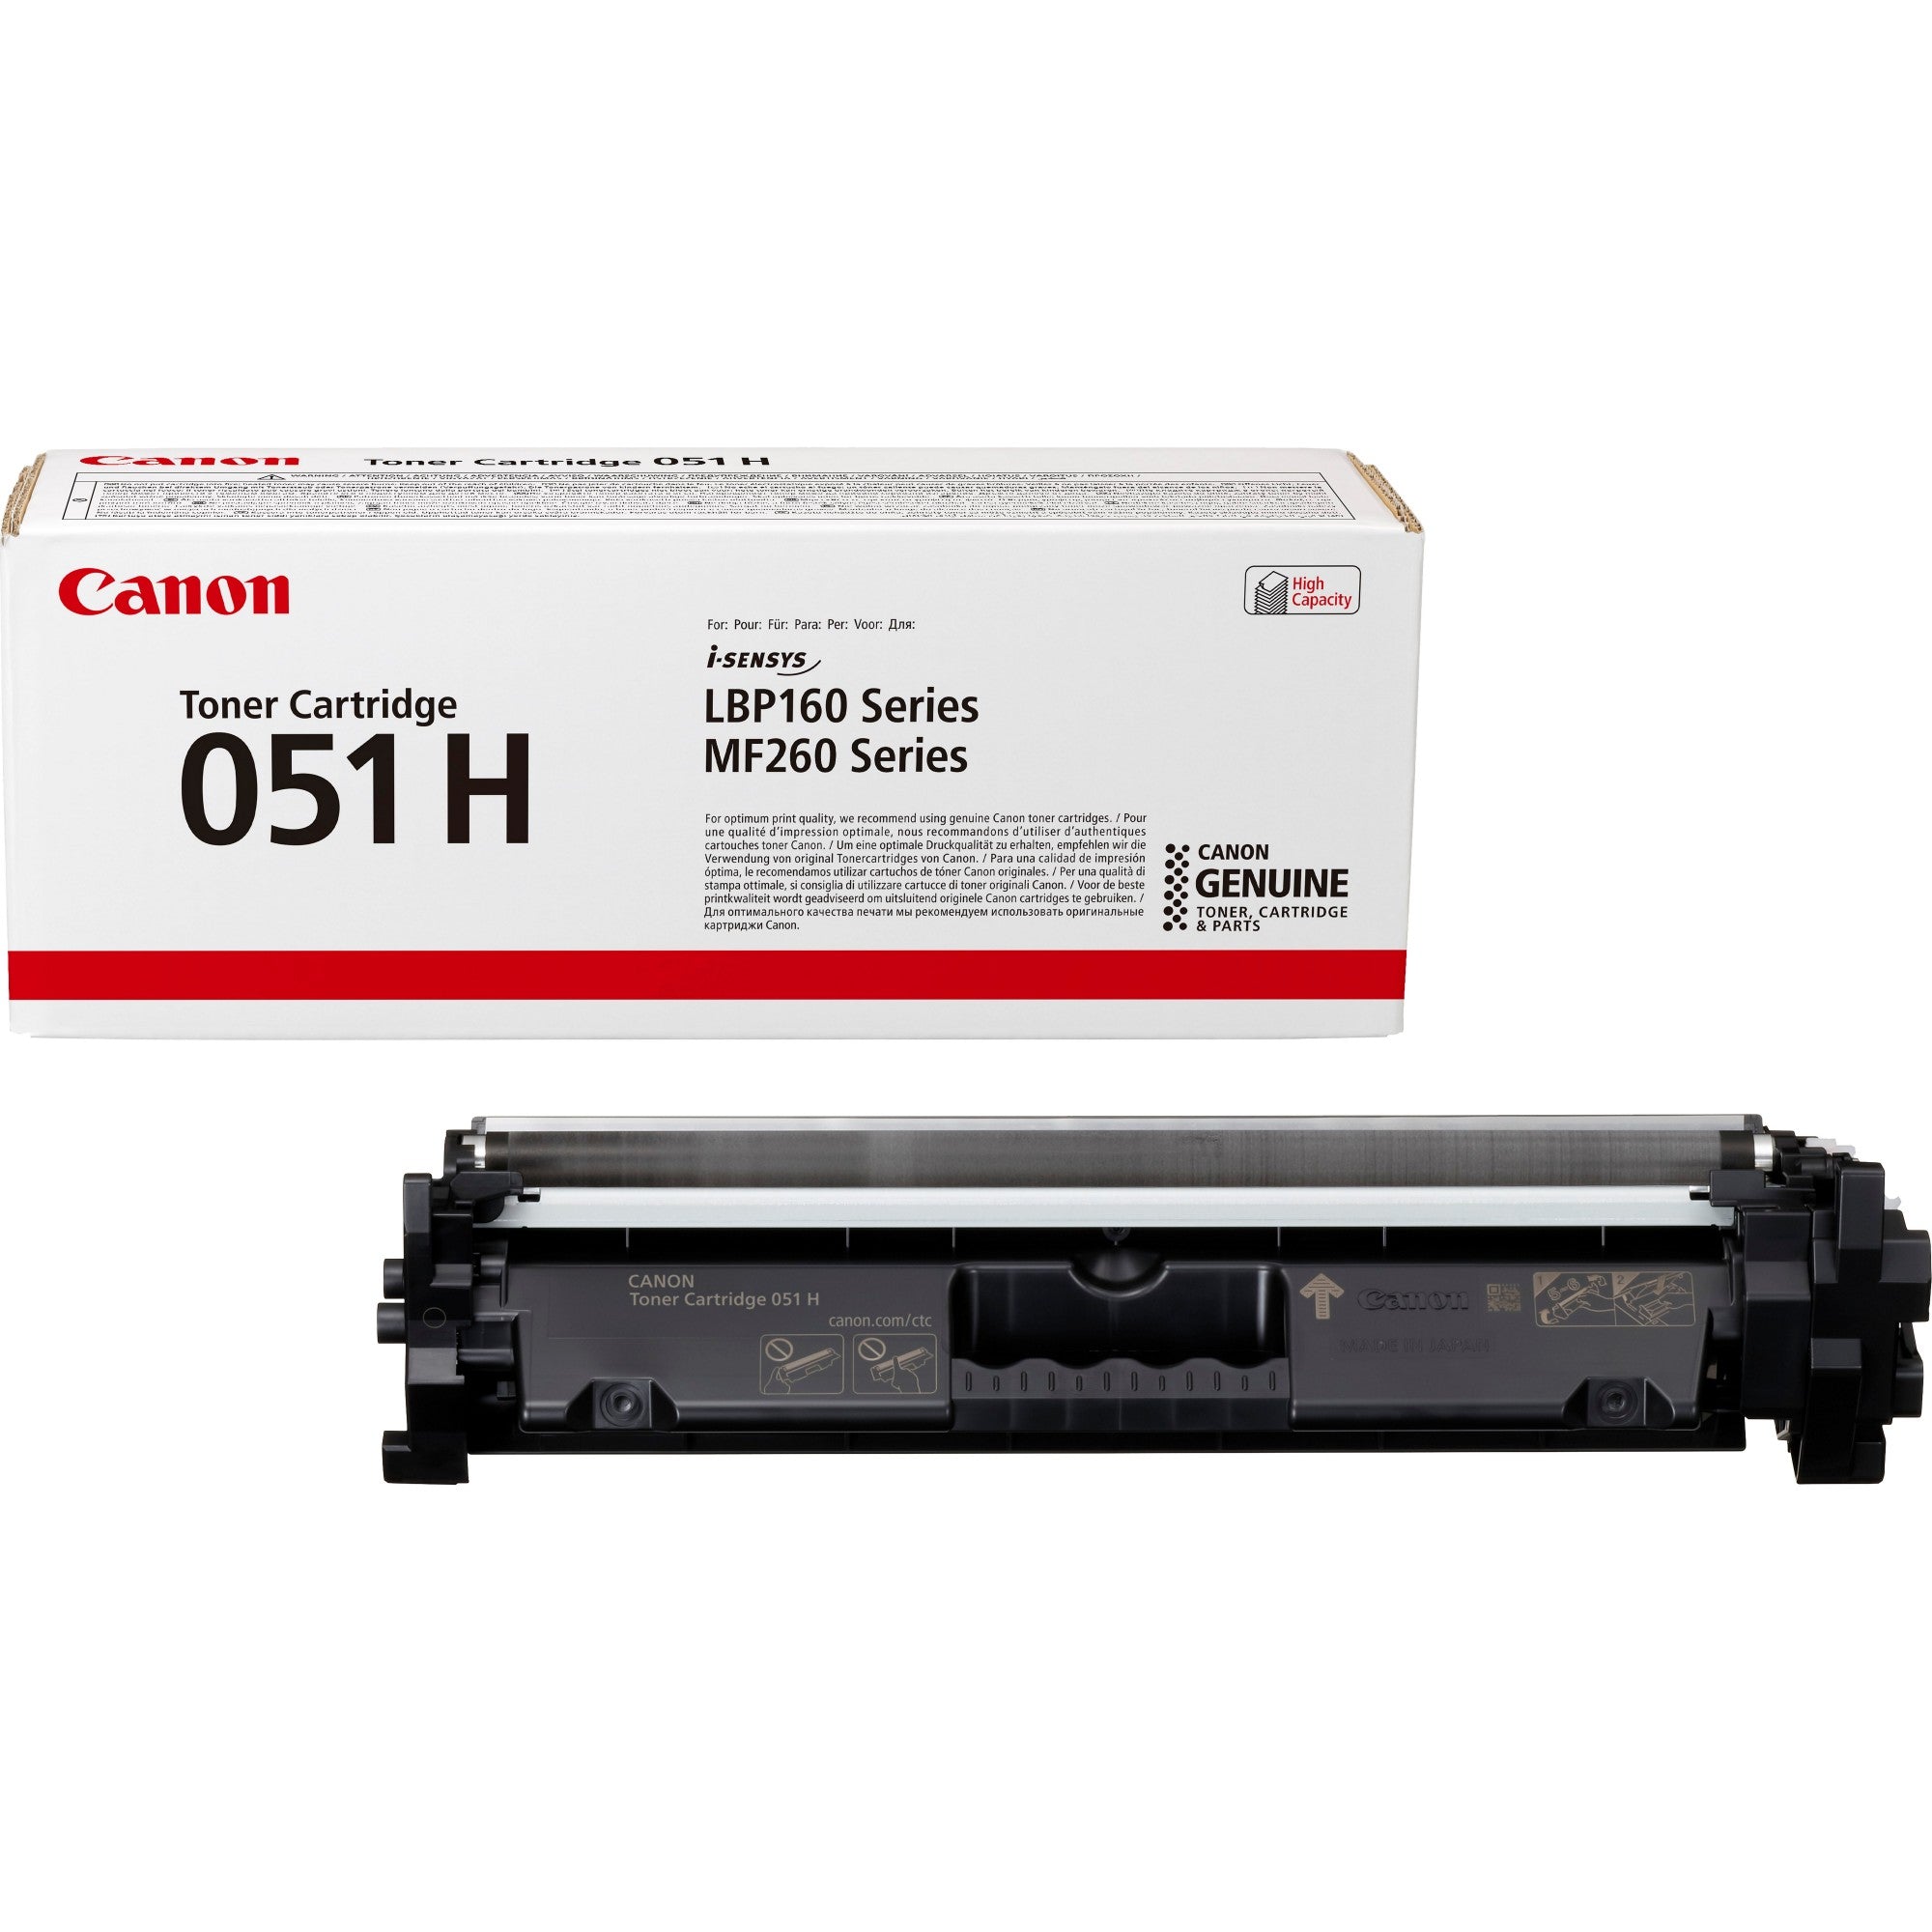 Canon 2169C002/051H Toner-kit, 4K pages ISO/IEC 19752 for Canon LBP-162